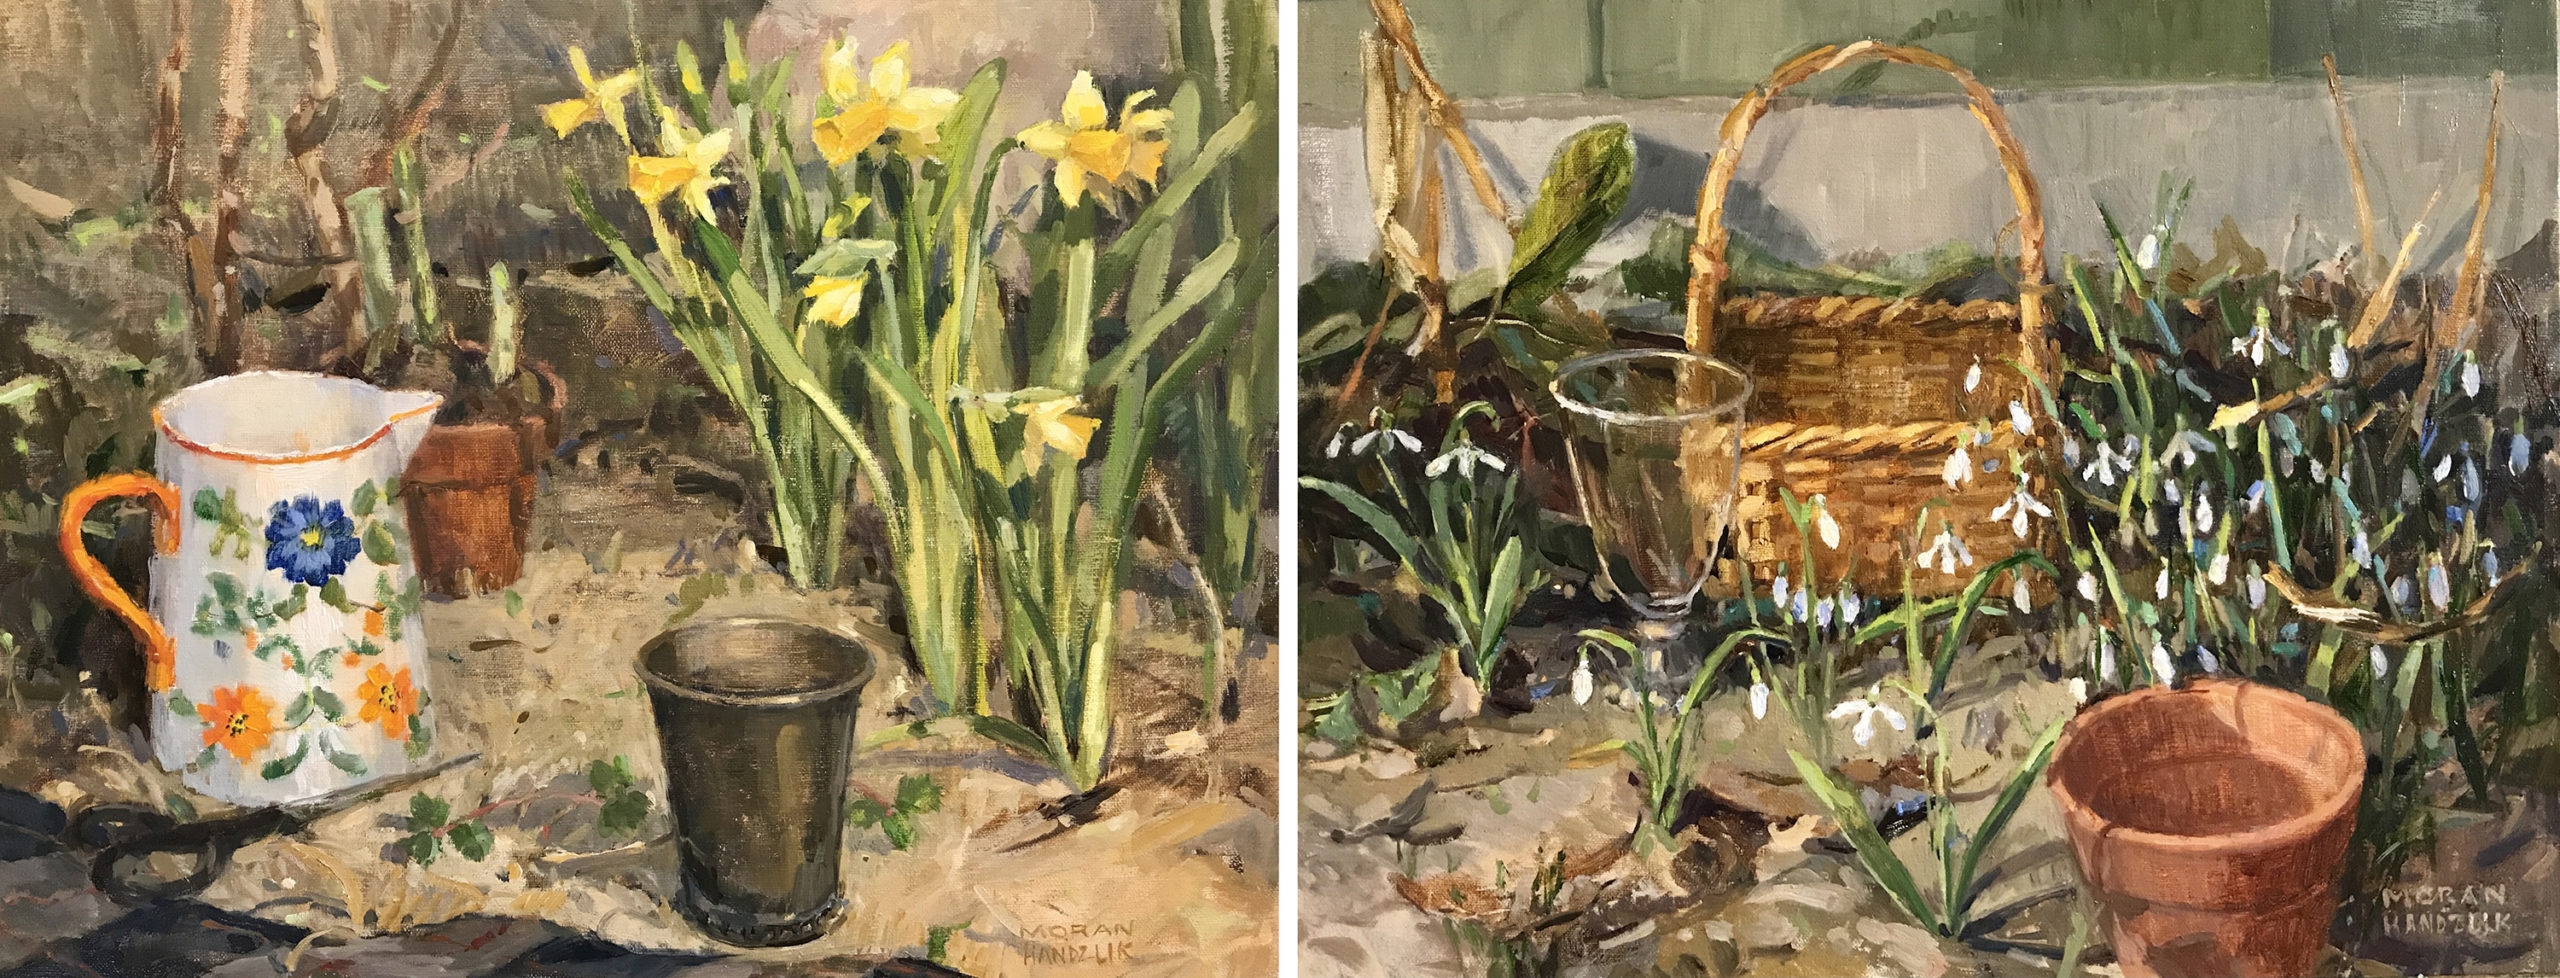 "Spring Showers," 11 x 14 in. and "Snow Drops and May Baskets"